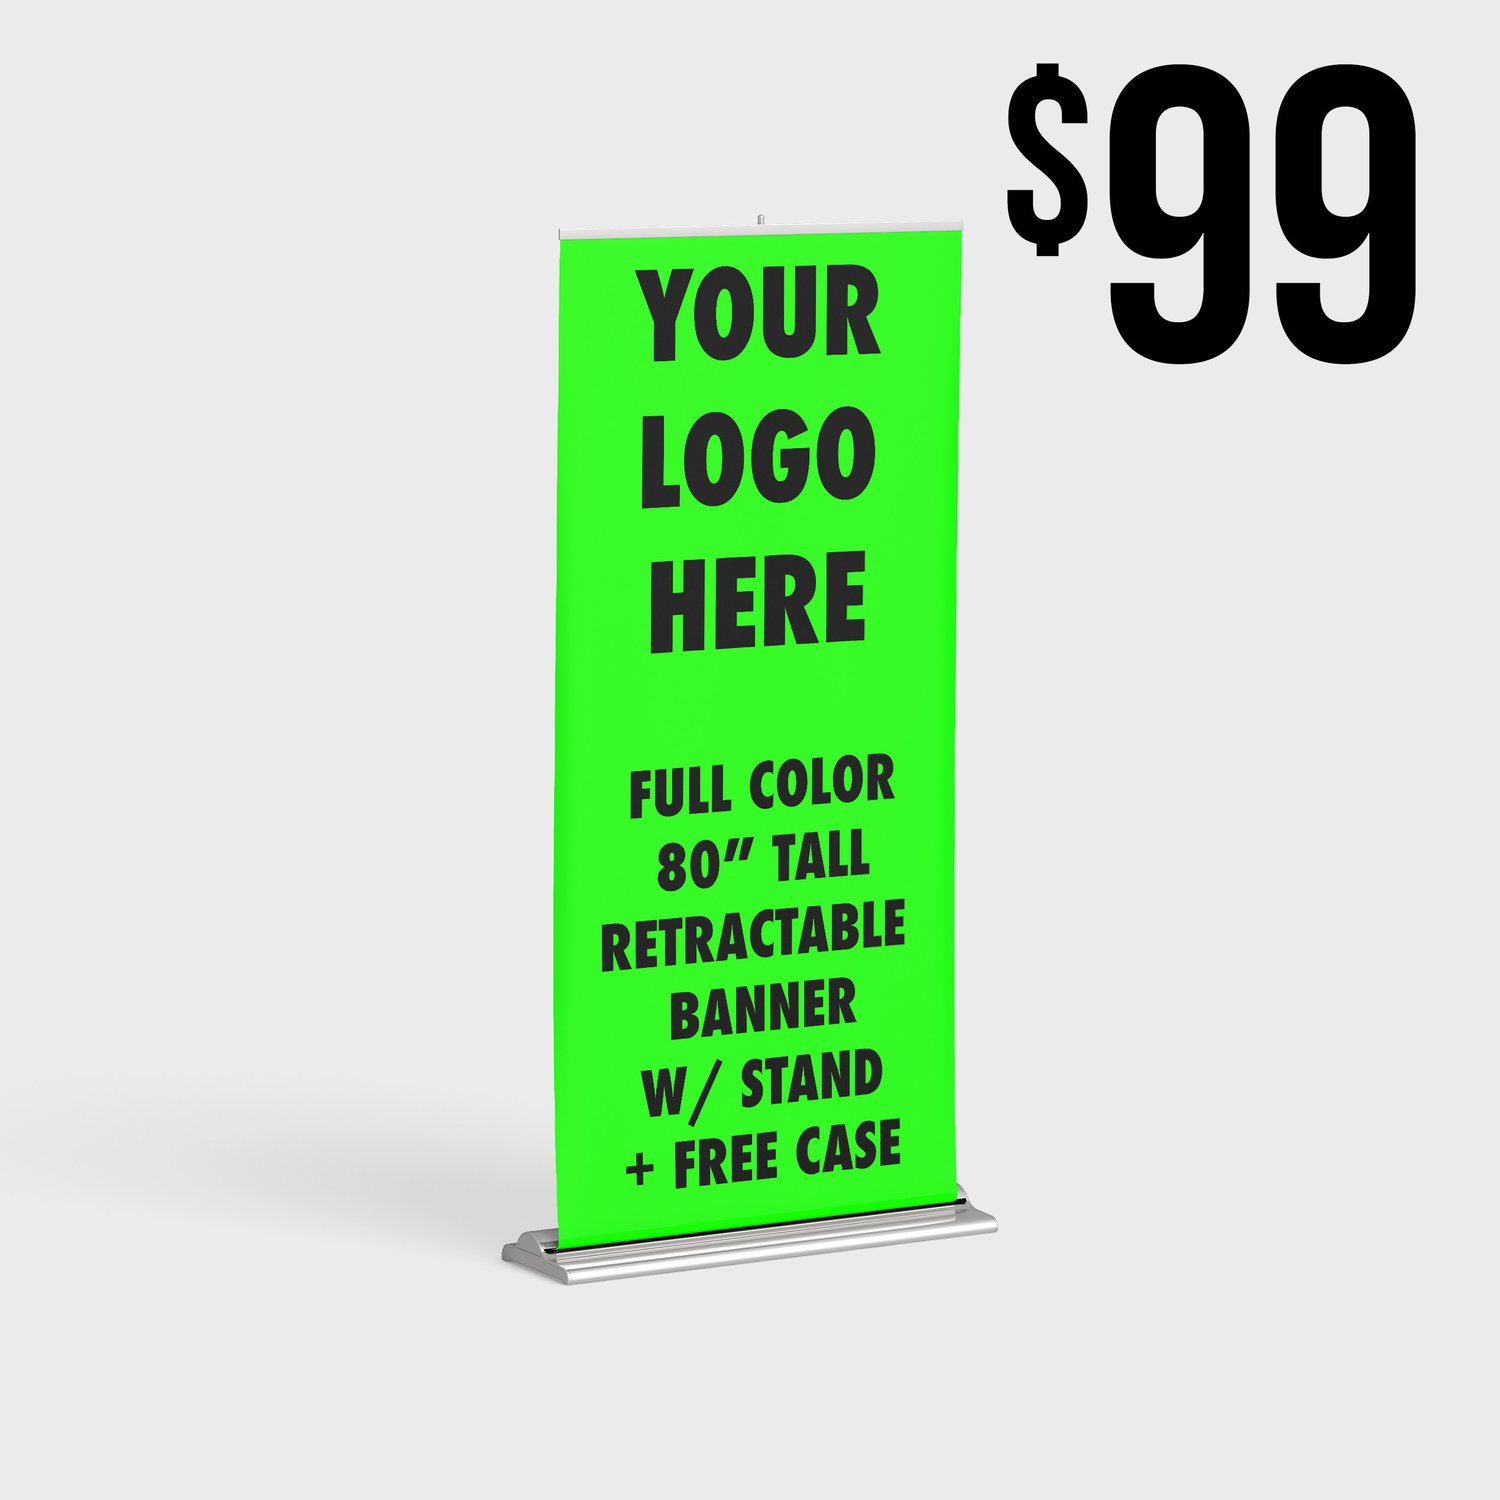 Image of Full Color Retractable Banner w/ Stand